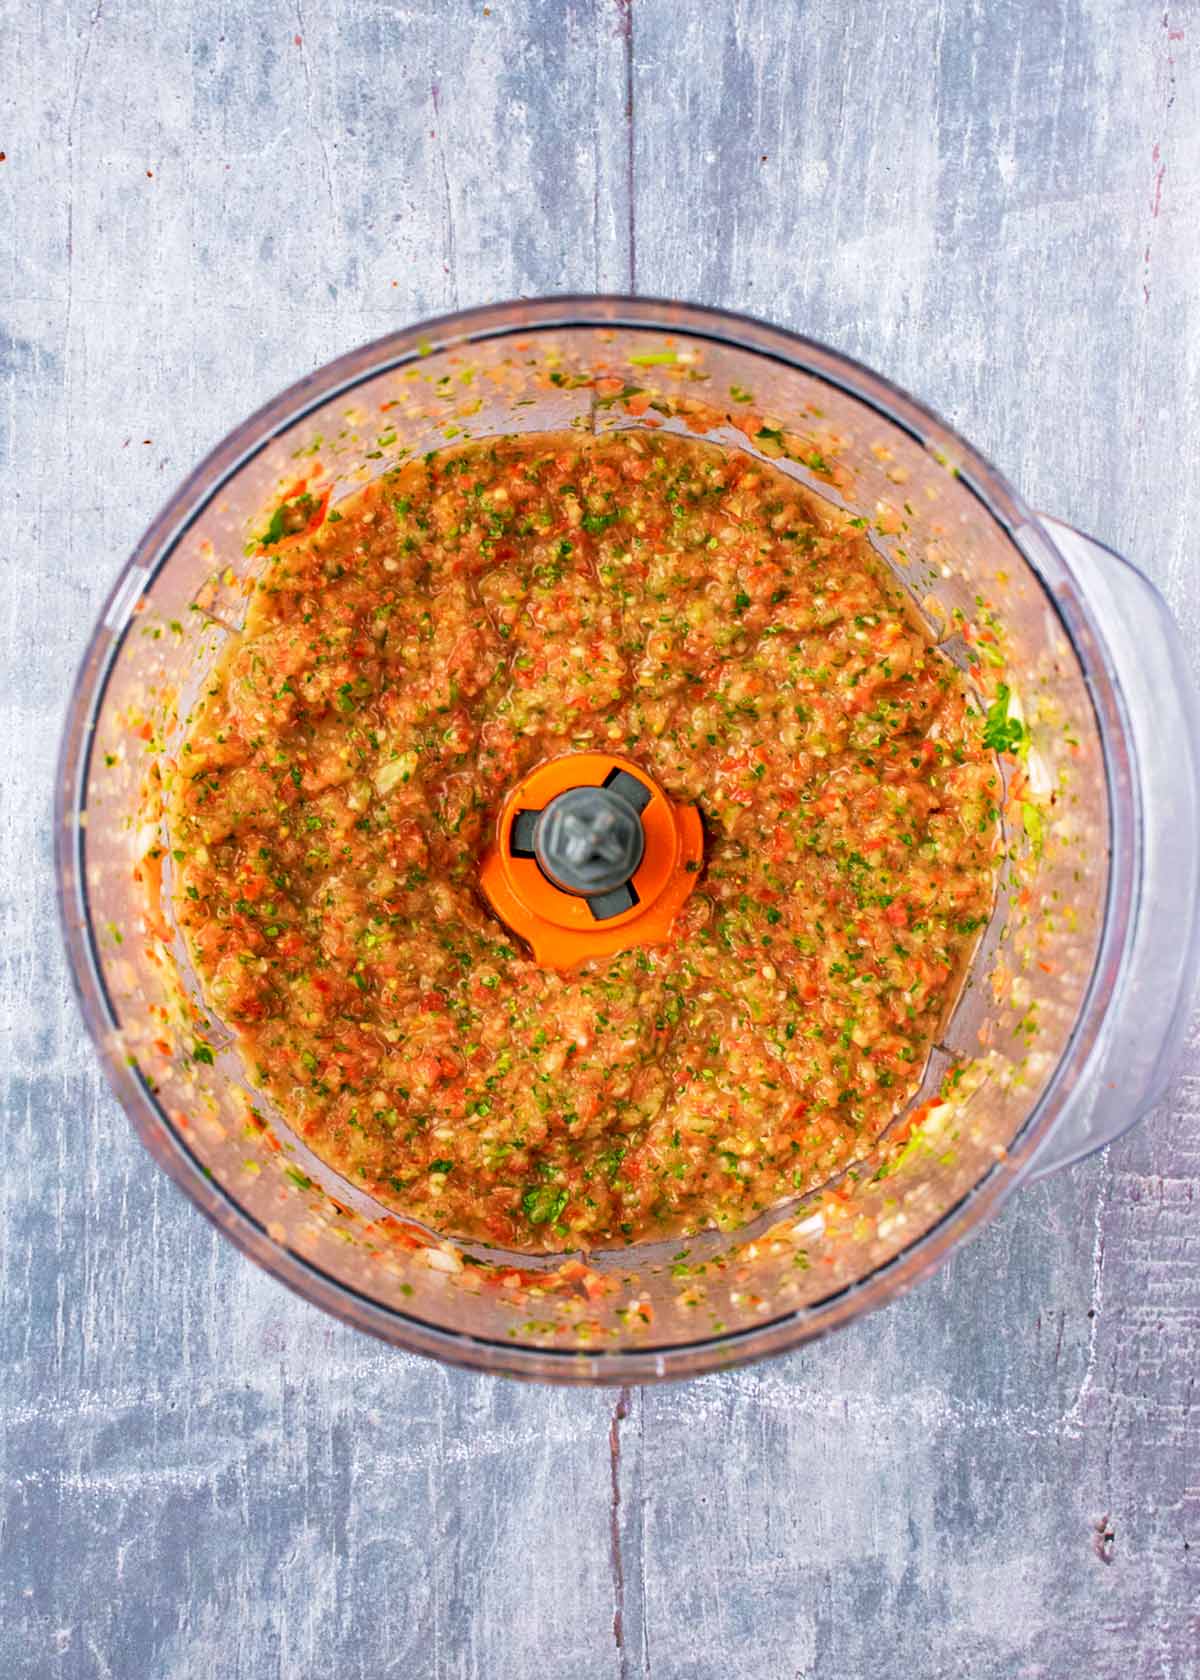 A food processor containing a finely chopped salsa.